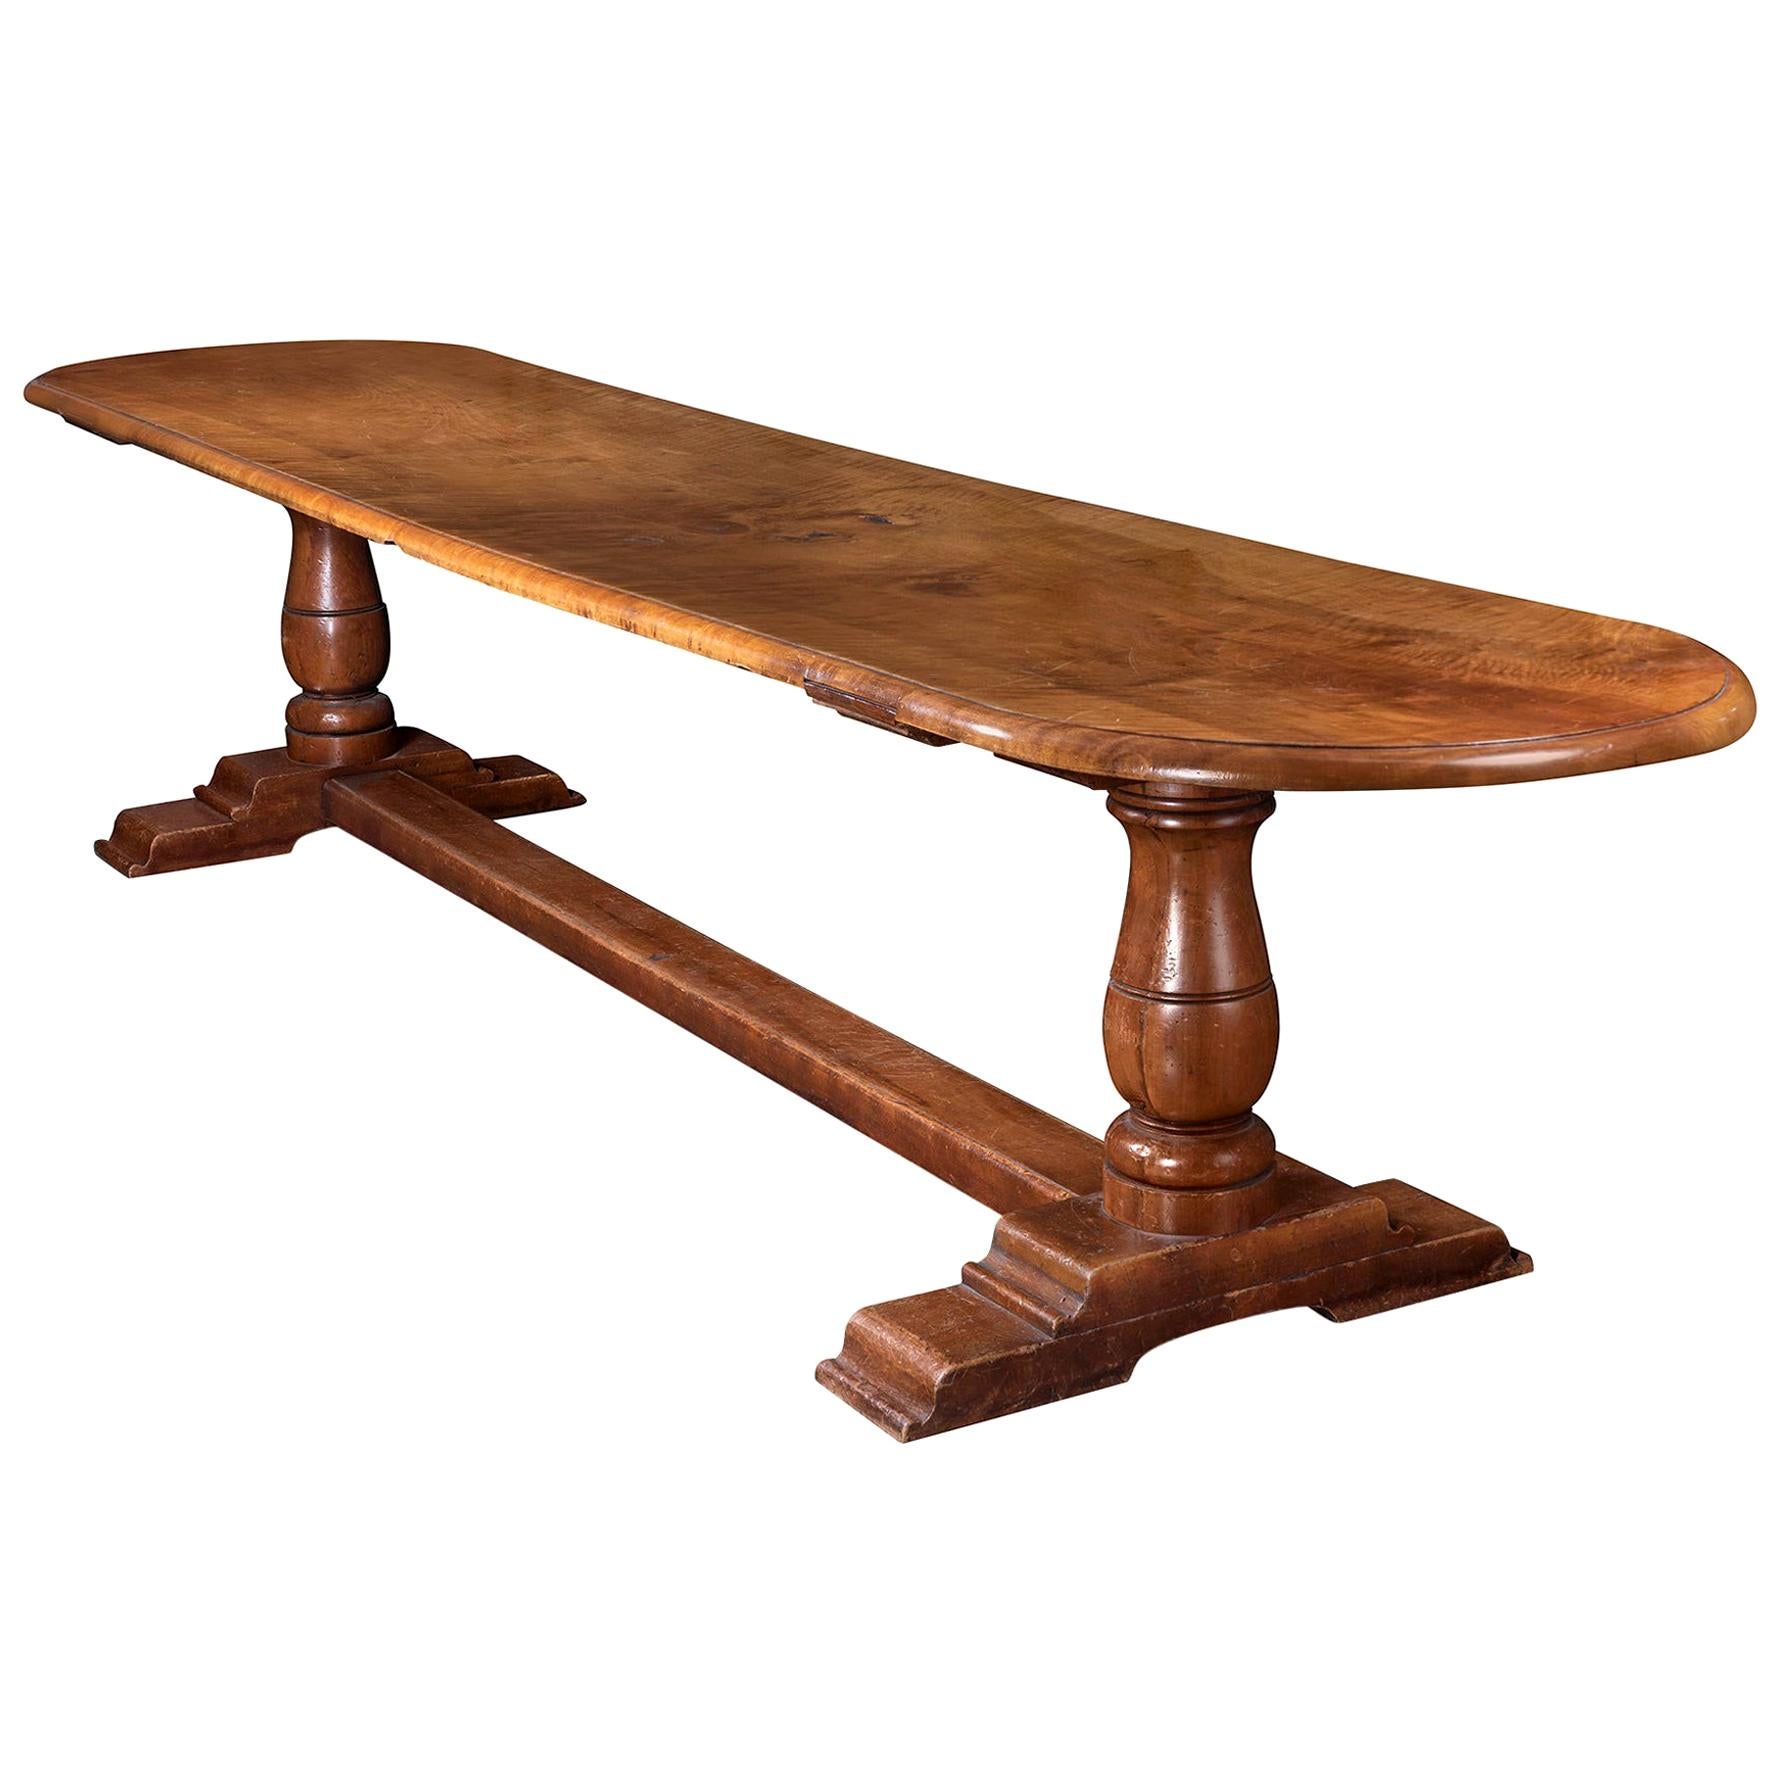 English Elm Refectory Table, Early 19th Century